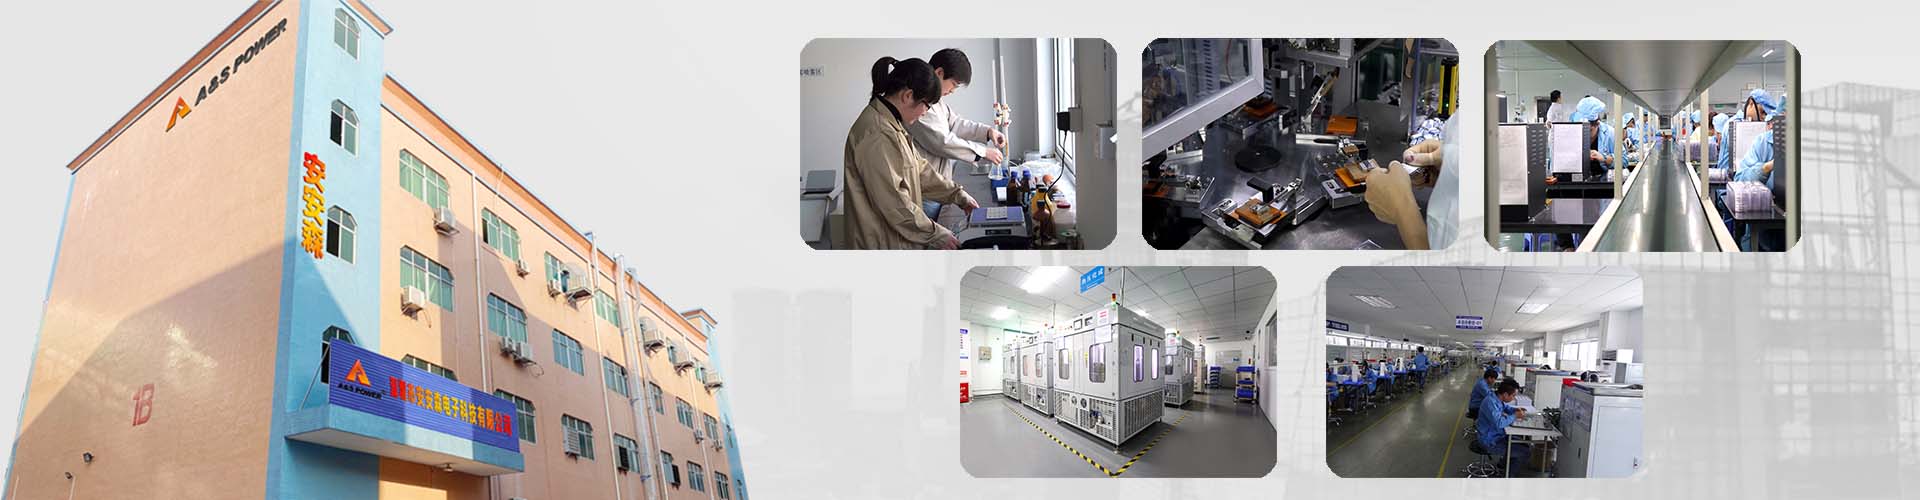 A&S Power Lithium Battery Manufacturer‎